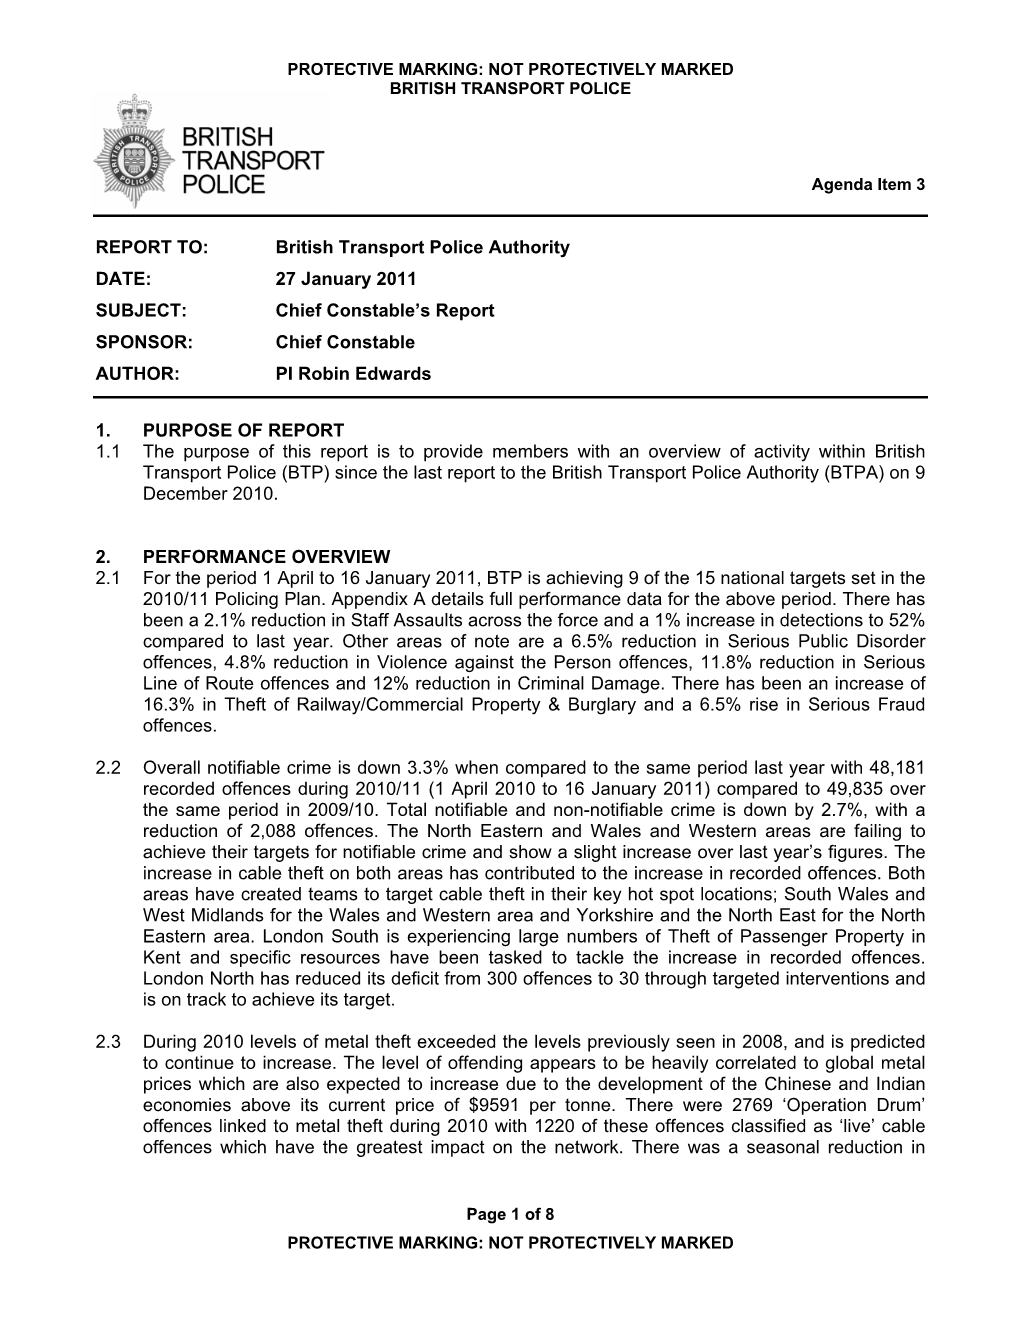 British Transport Police Authority DATE: 27 January 2011 SUBJECT: Chief Constable’S Report SPONSOR: Chief Constable AUTHOR: PI Robin Edwards